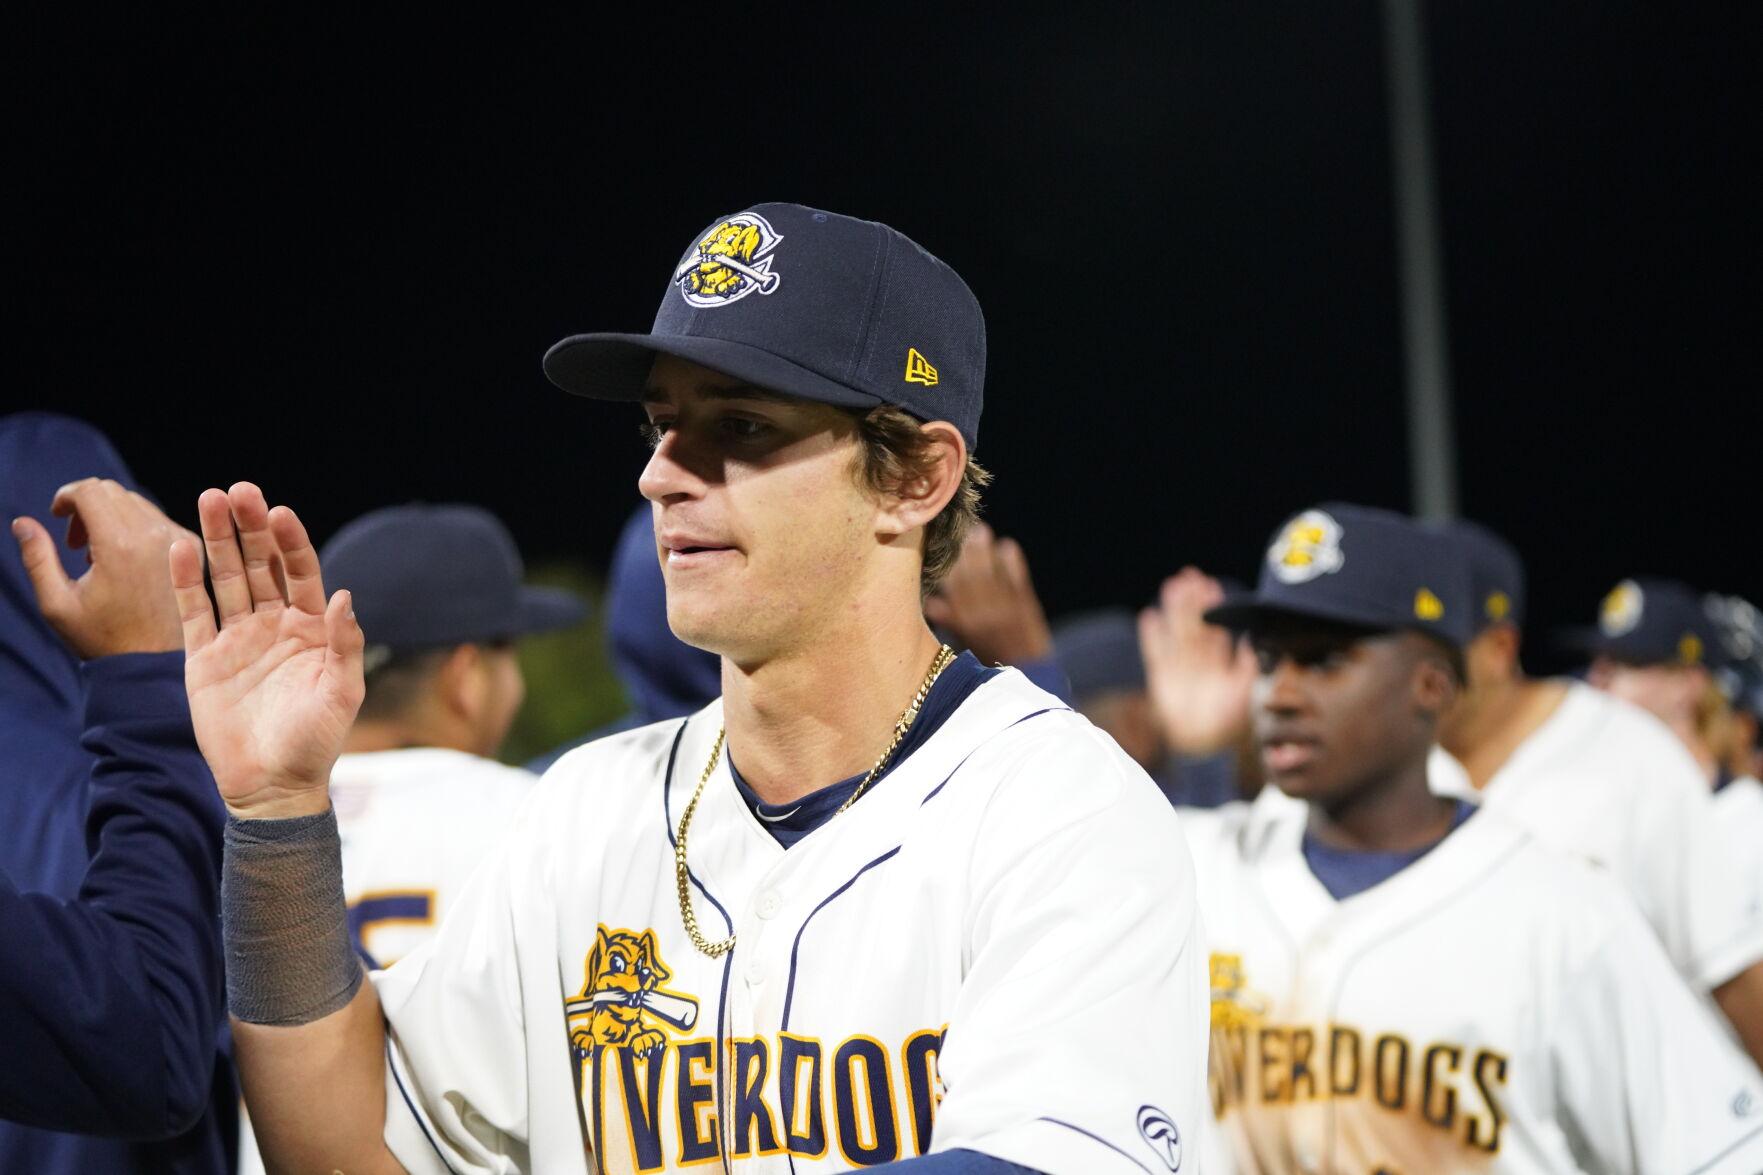 Carson Williams, Tampa Bay Rays' No. 1 pick, shines for RiverDogs at 18